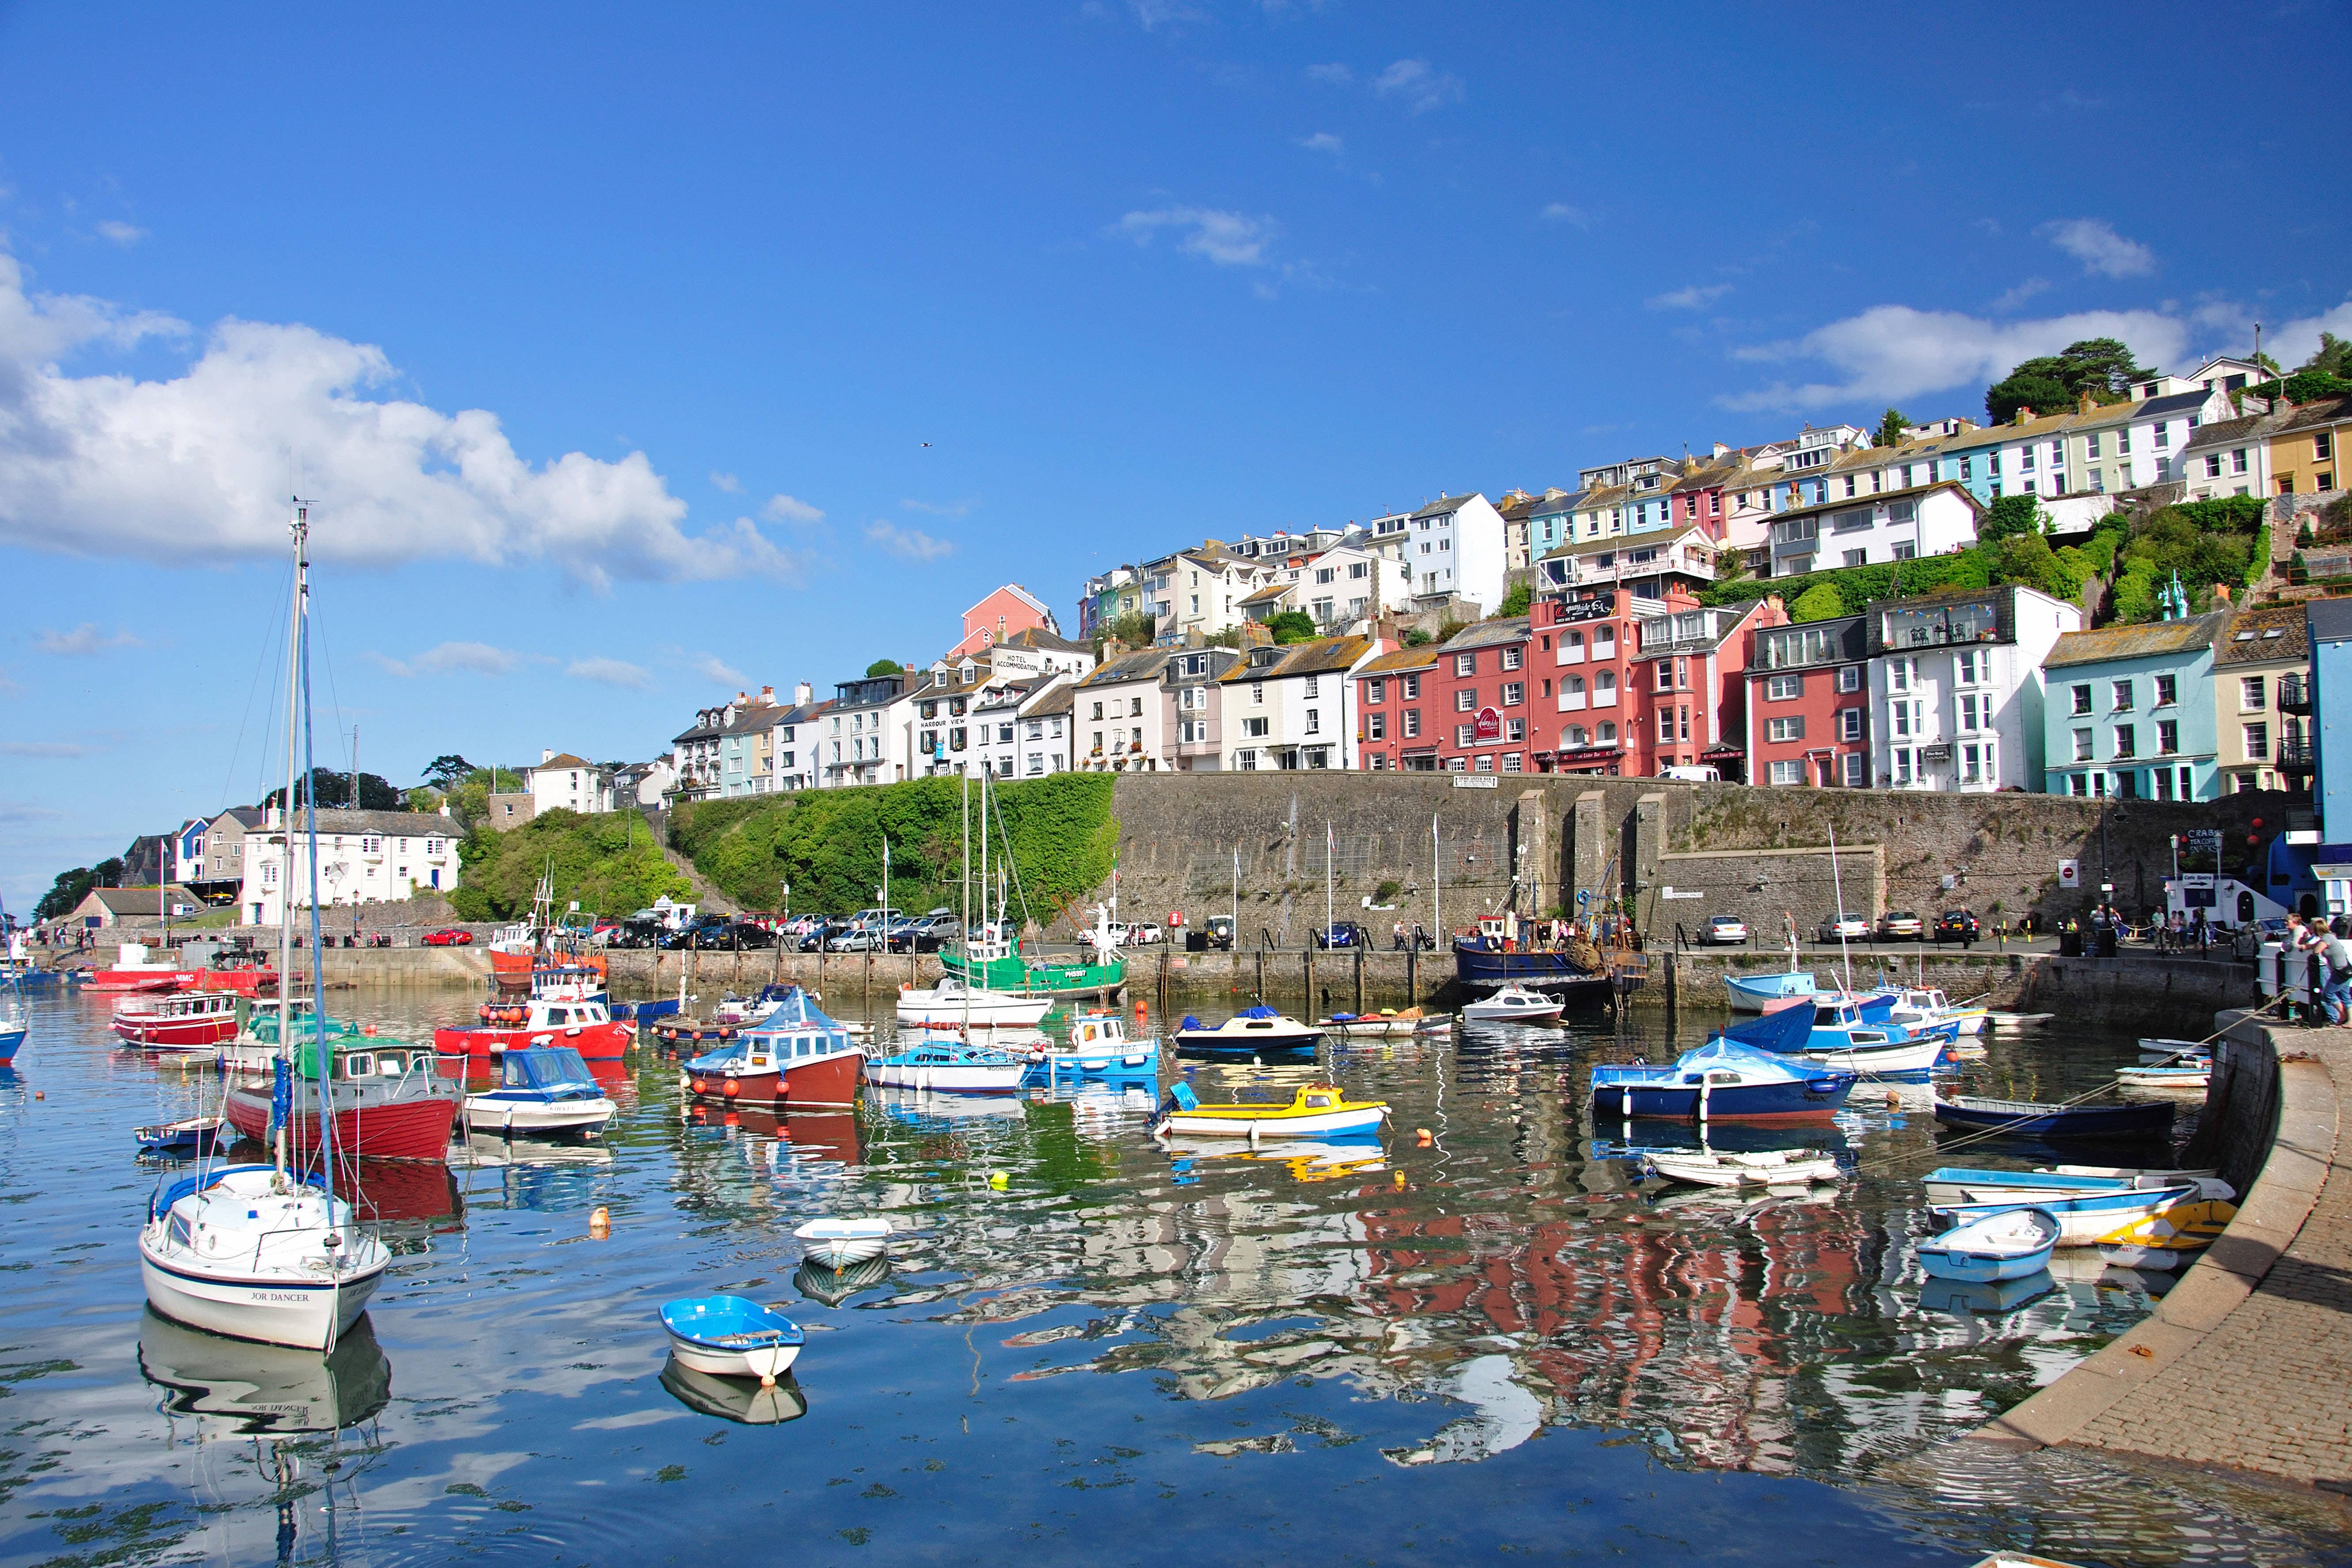 Residents in Brixham have been told not to drink water without boiling it